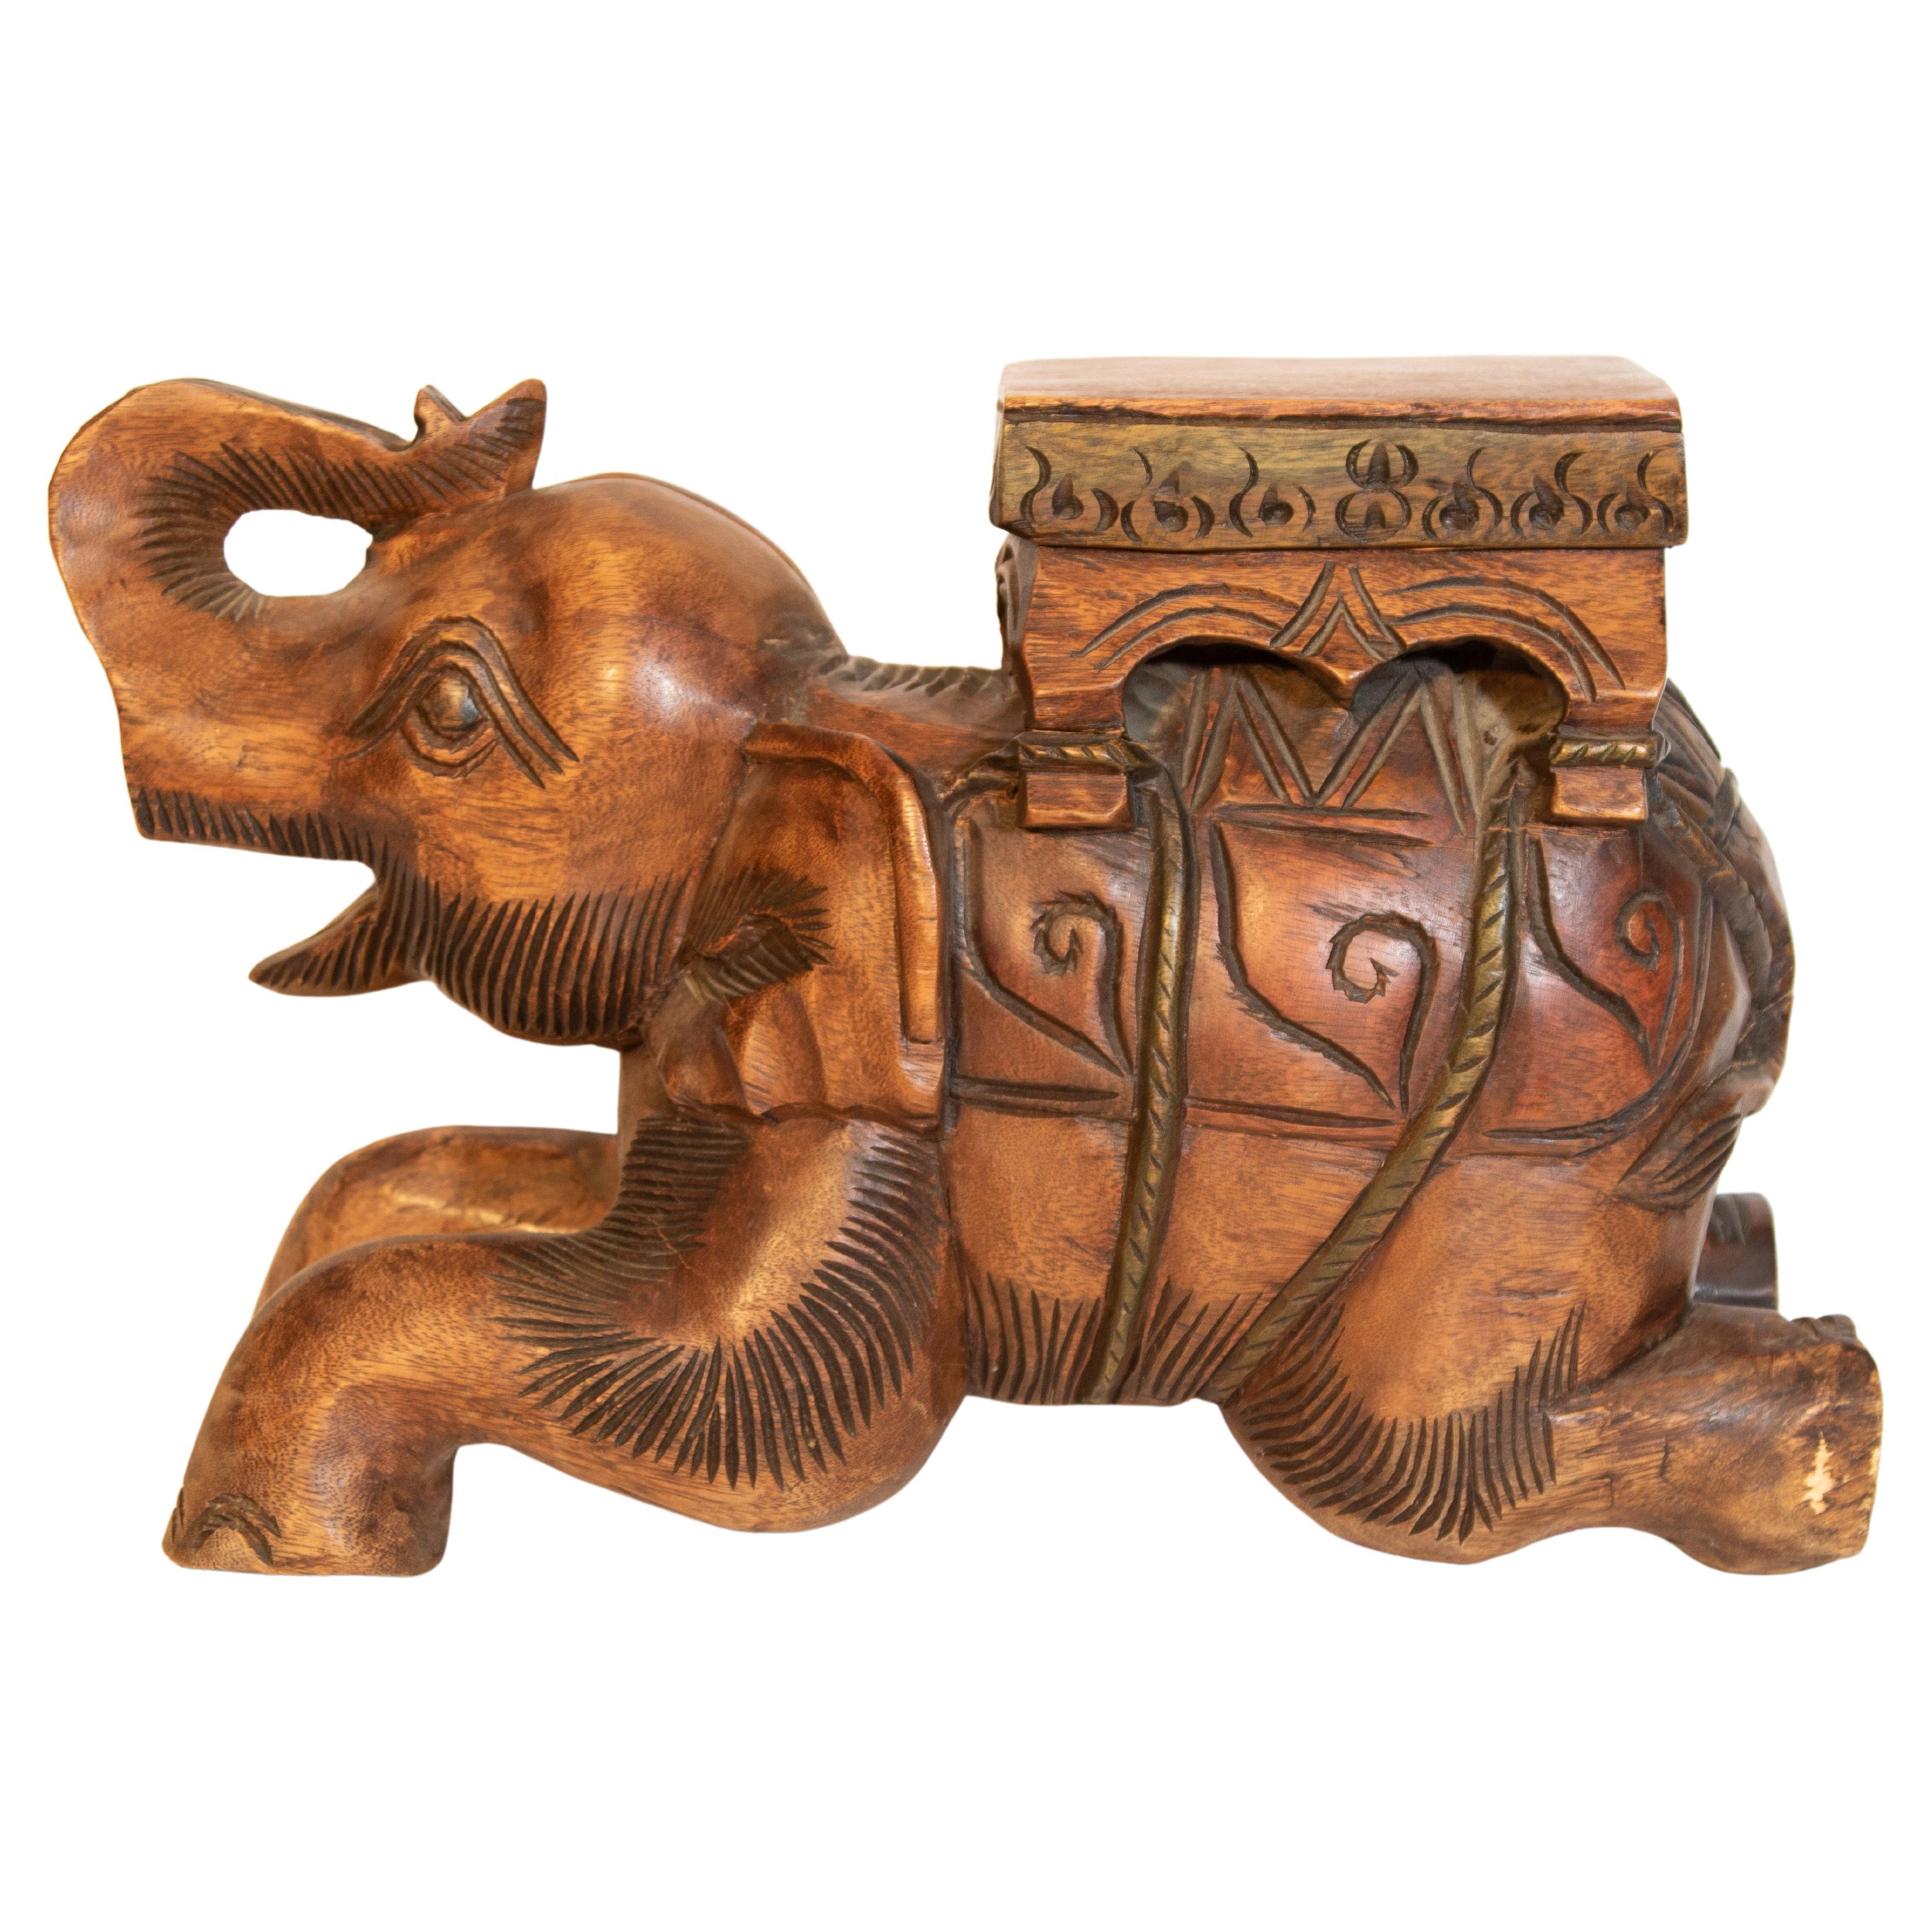 Vintage Asian Elephant Hand-Carved Wooden Stool For Sale